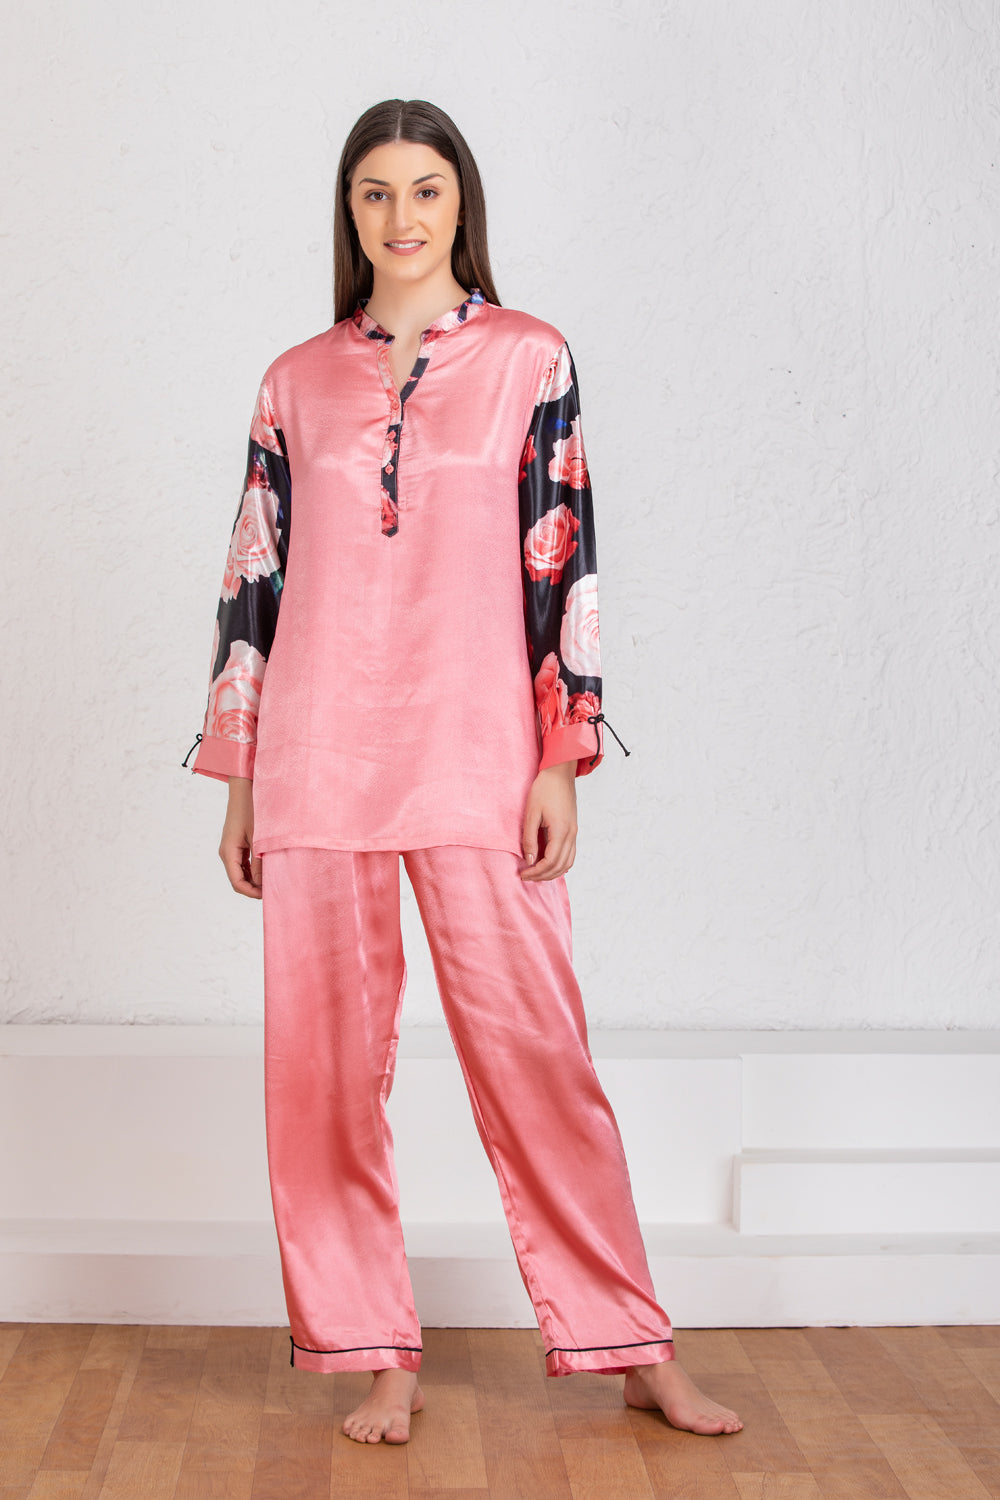 Plain satin Night suit with floral Print sleeves - Private Lives